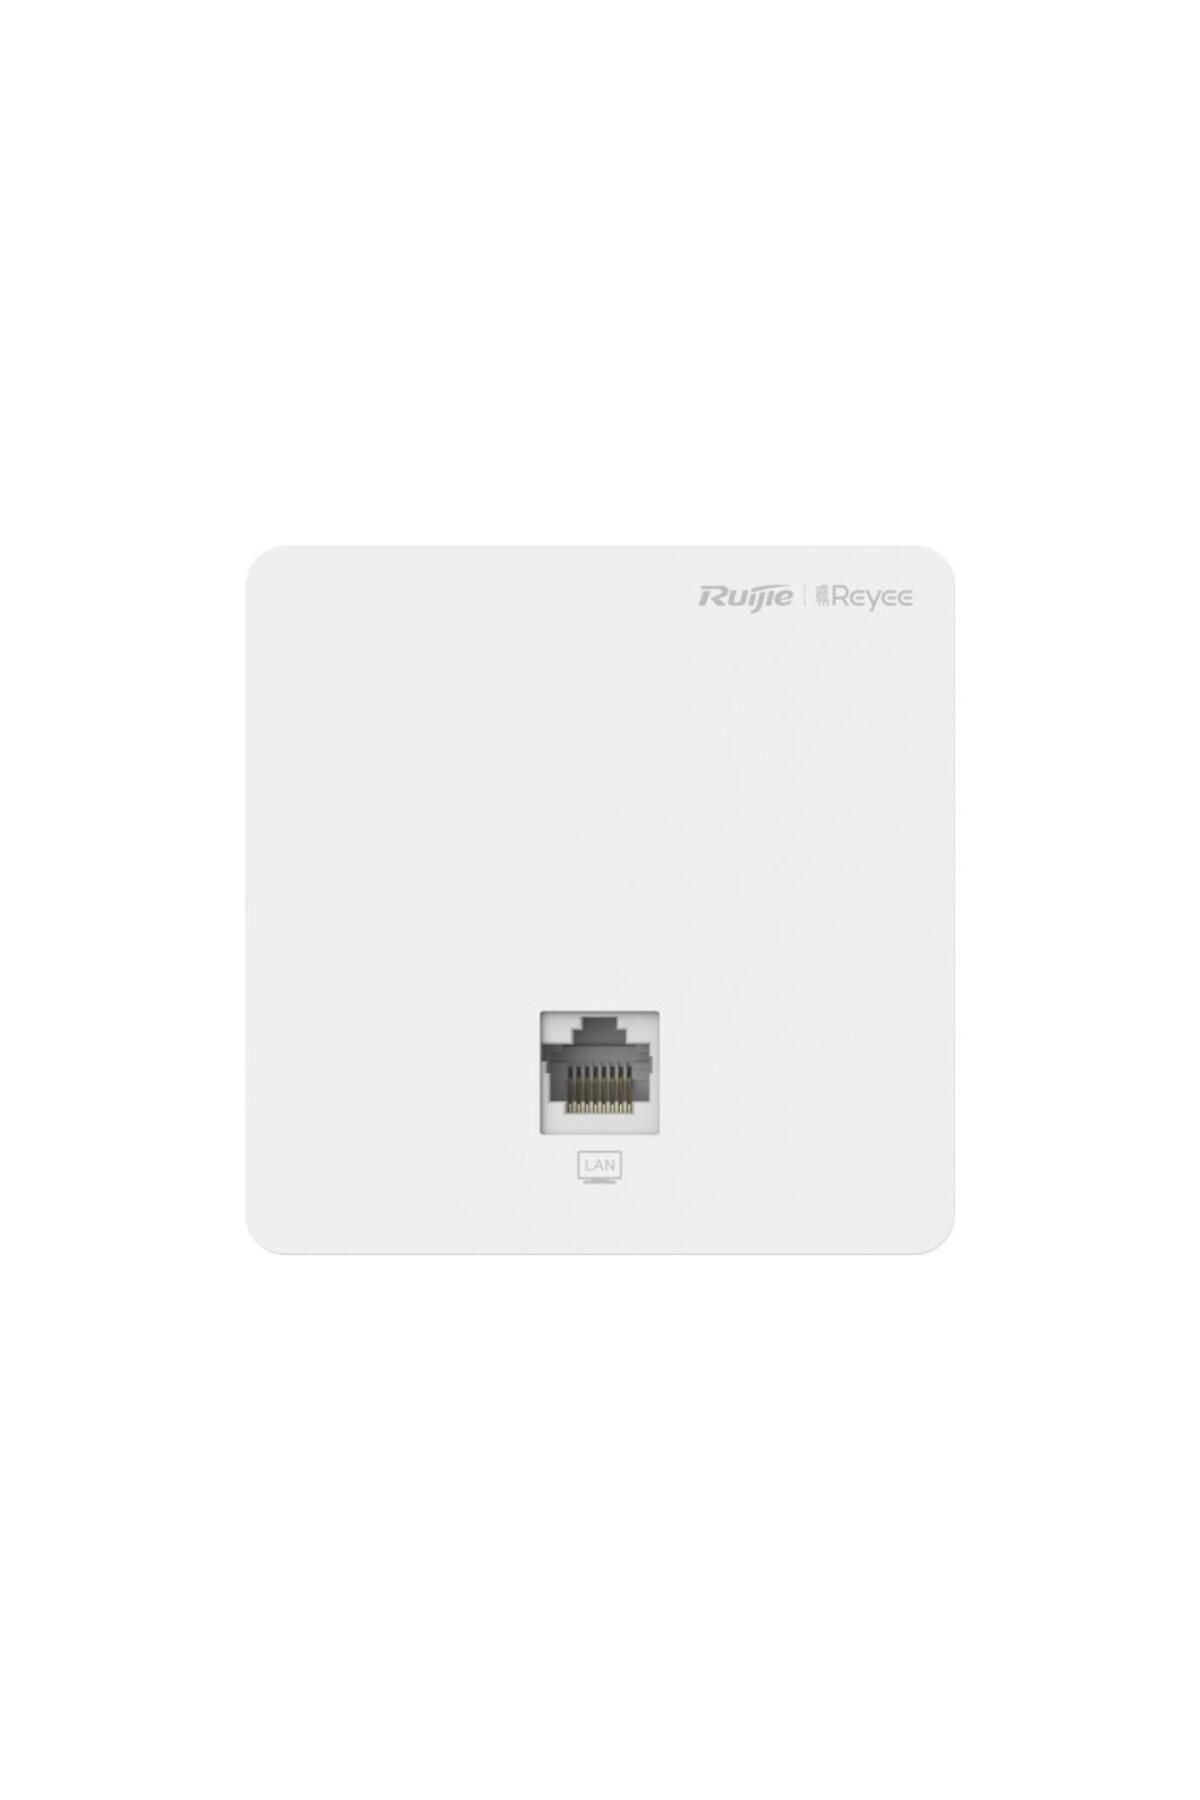 REYES Reyee Rg-rap1200(F)iç Ortam Access Point-dual-band 867mbps At 5ghz 400mbps At 2.4ghz, 2fast Ethern P